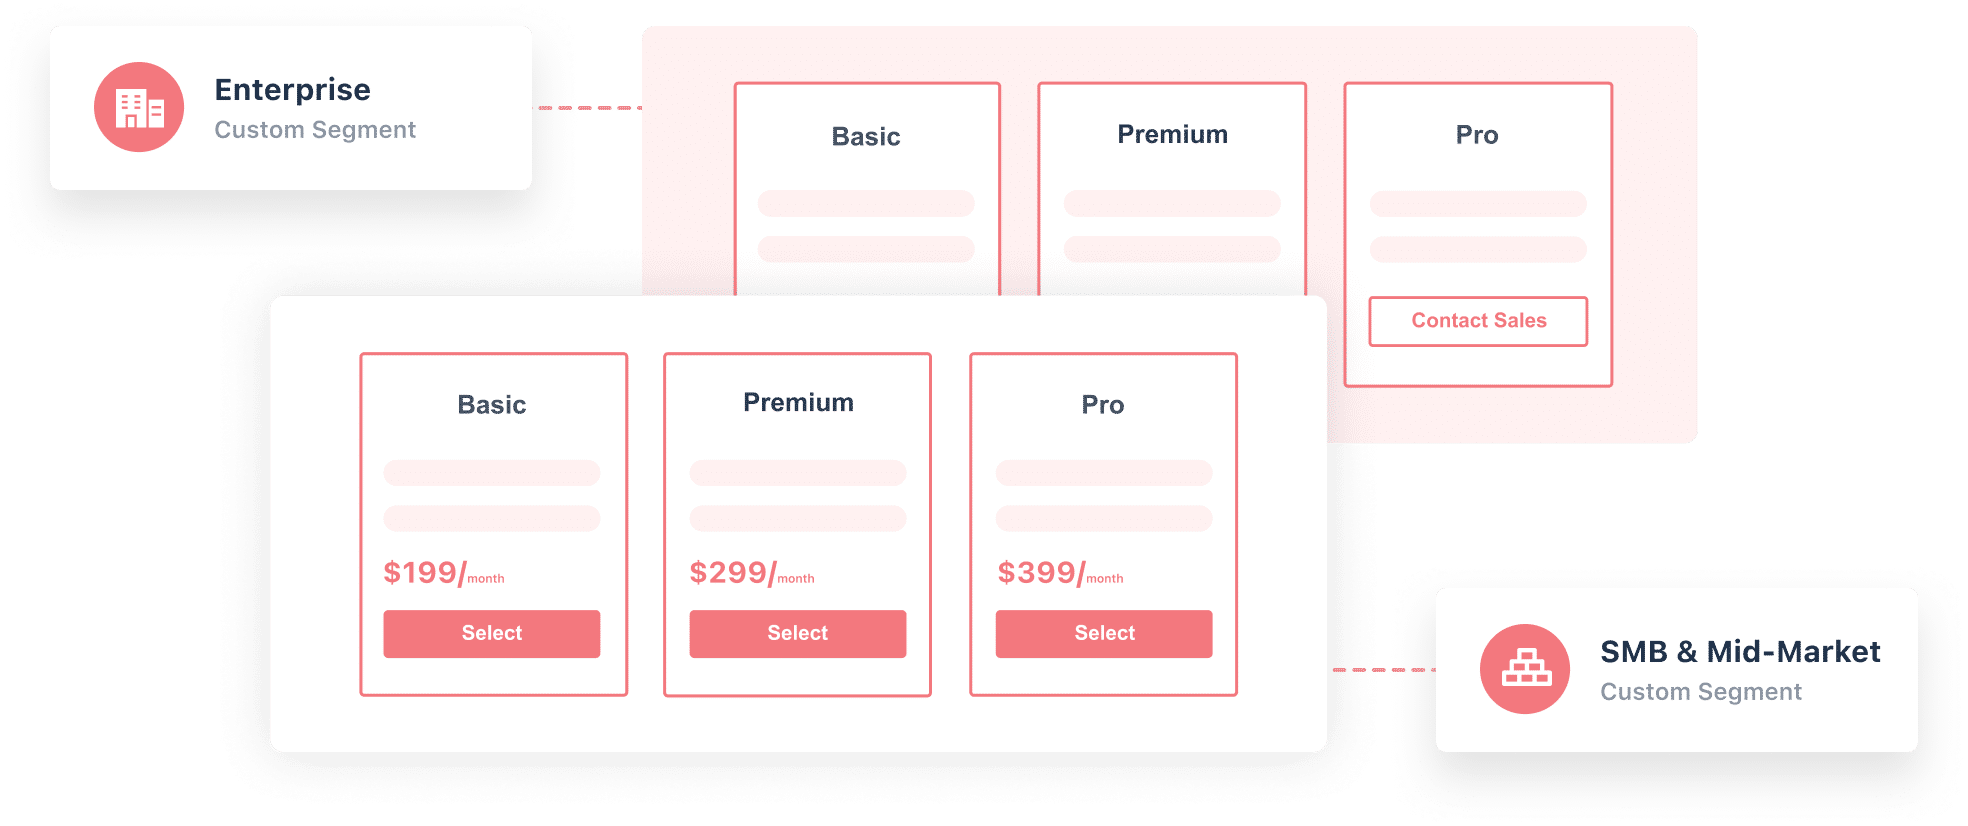 Personalized Pricing Content For Increased Revenue